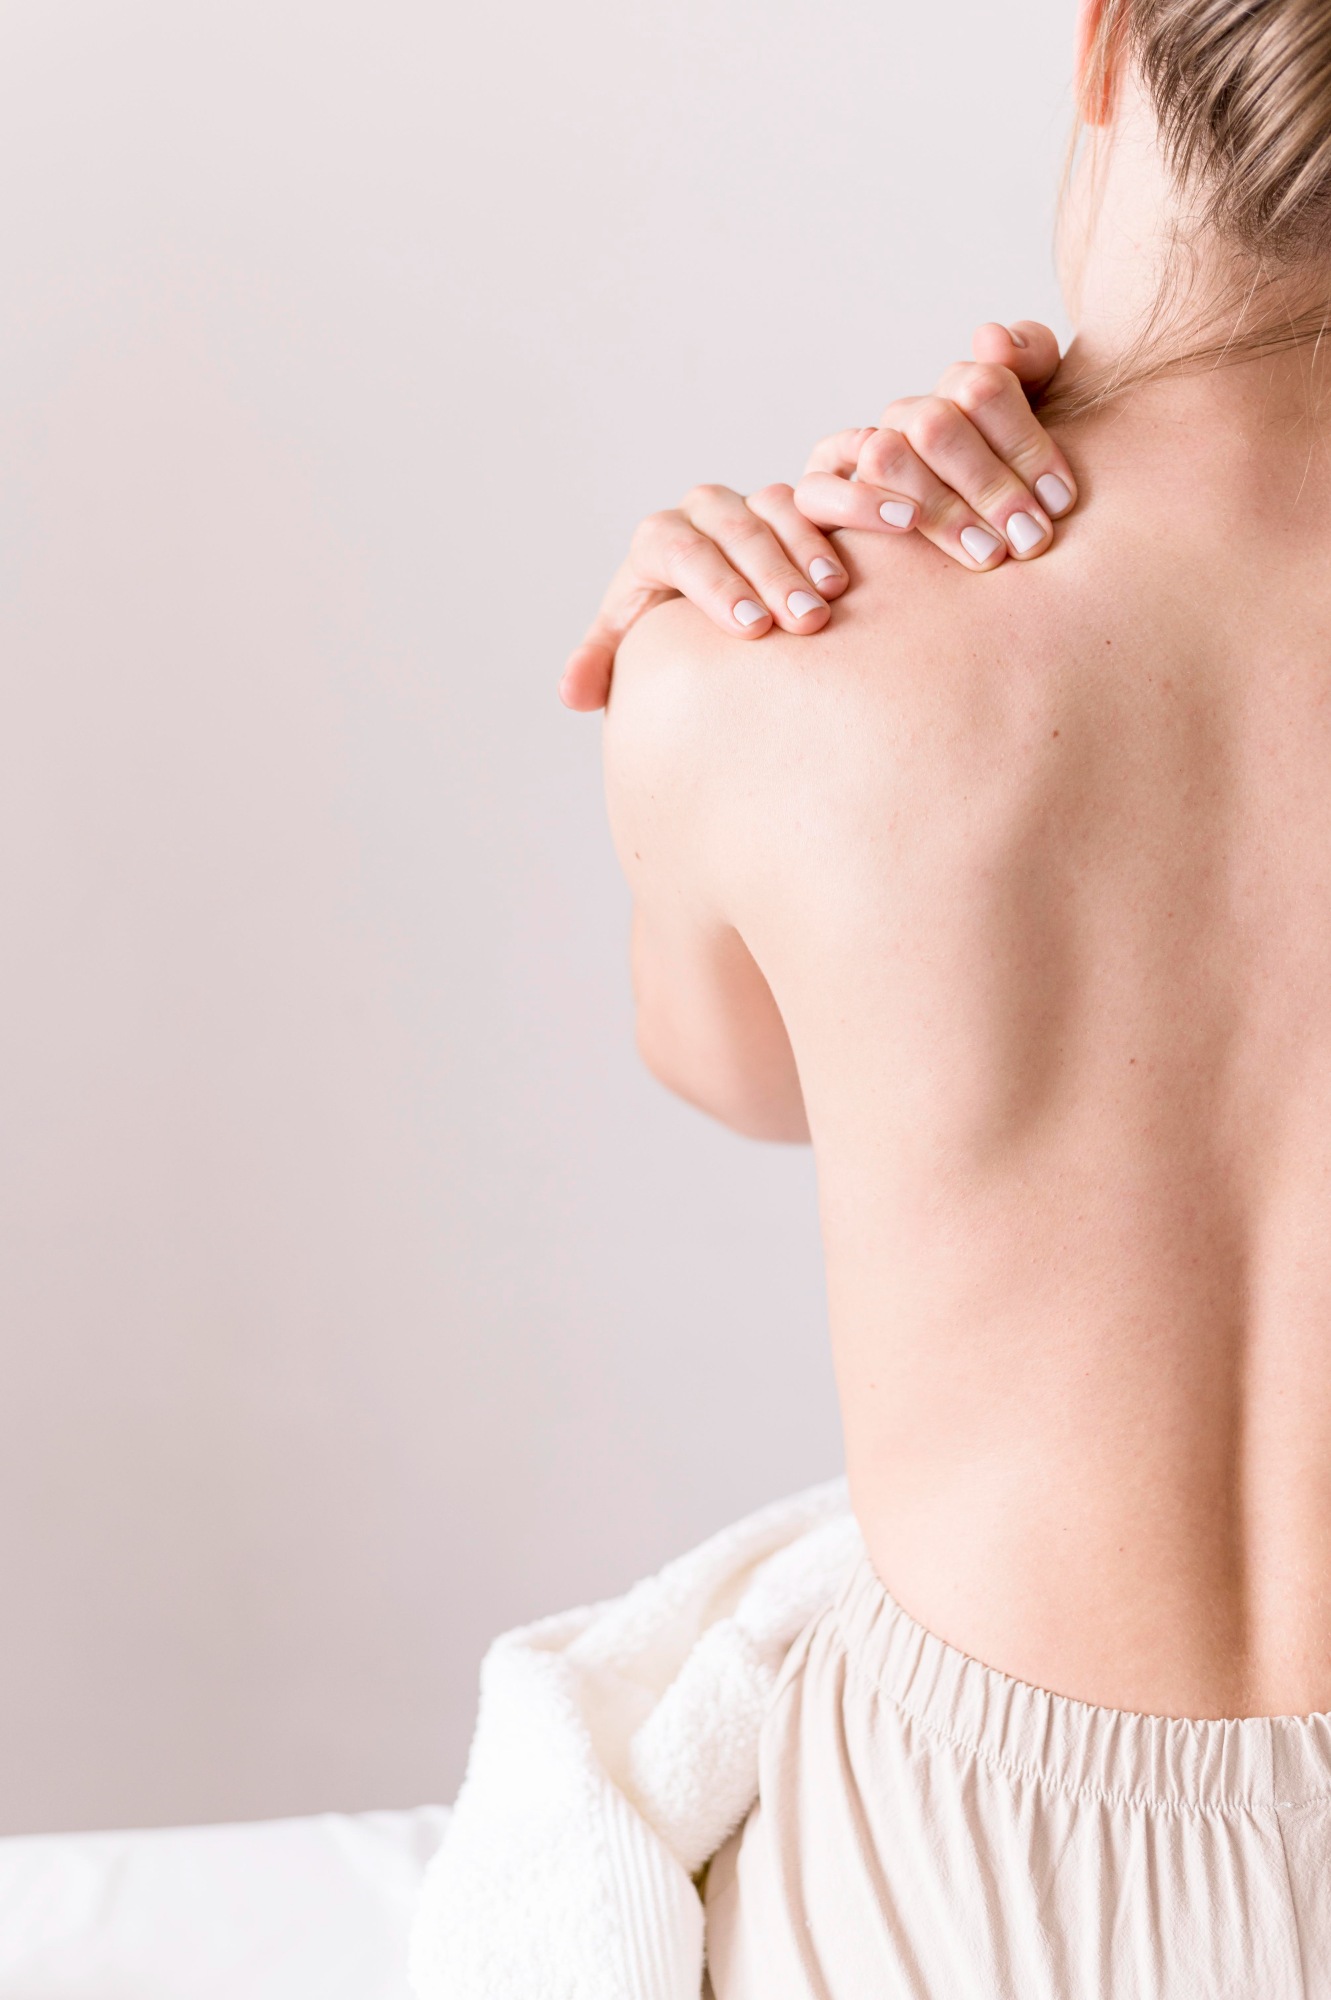 When to Know Your Shoulder Pain is Serious